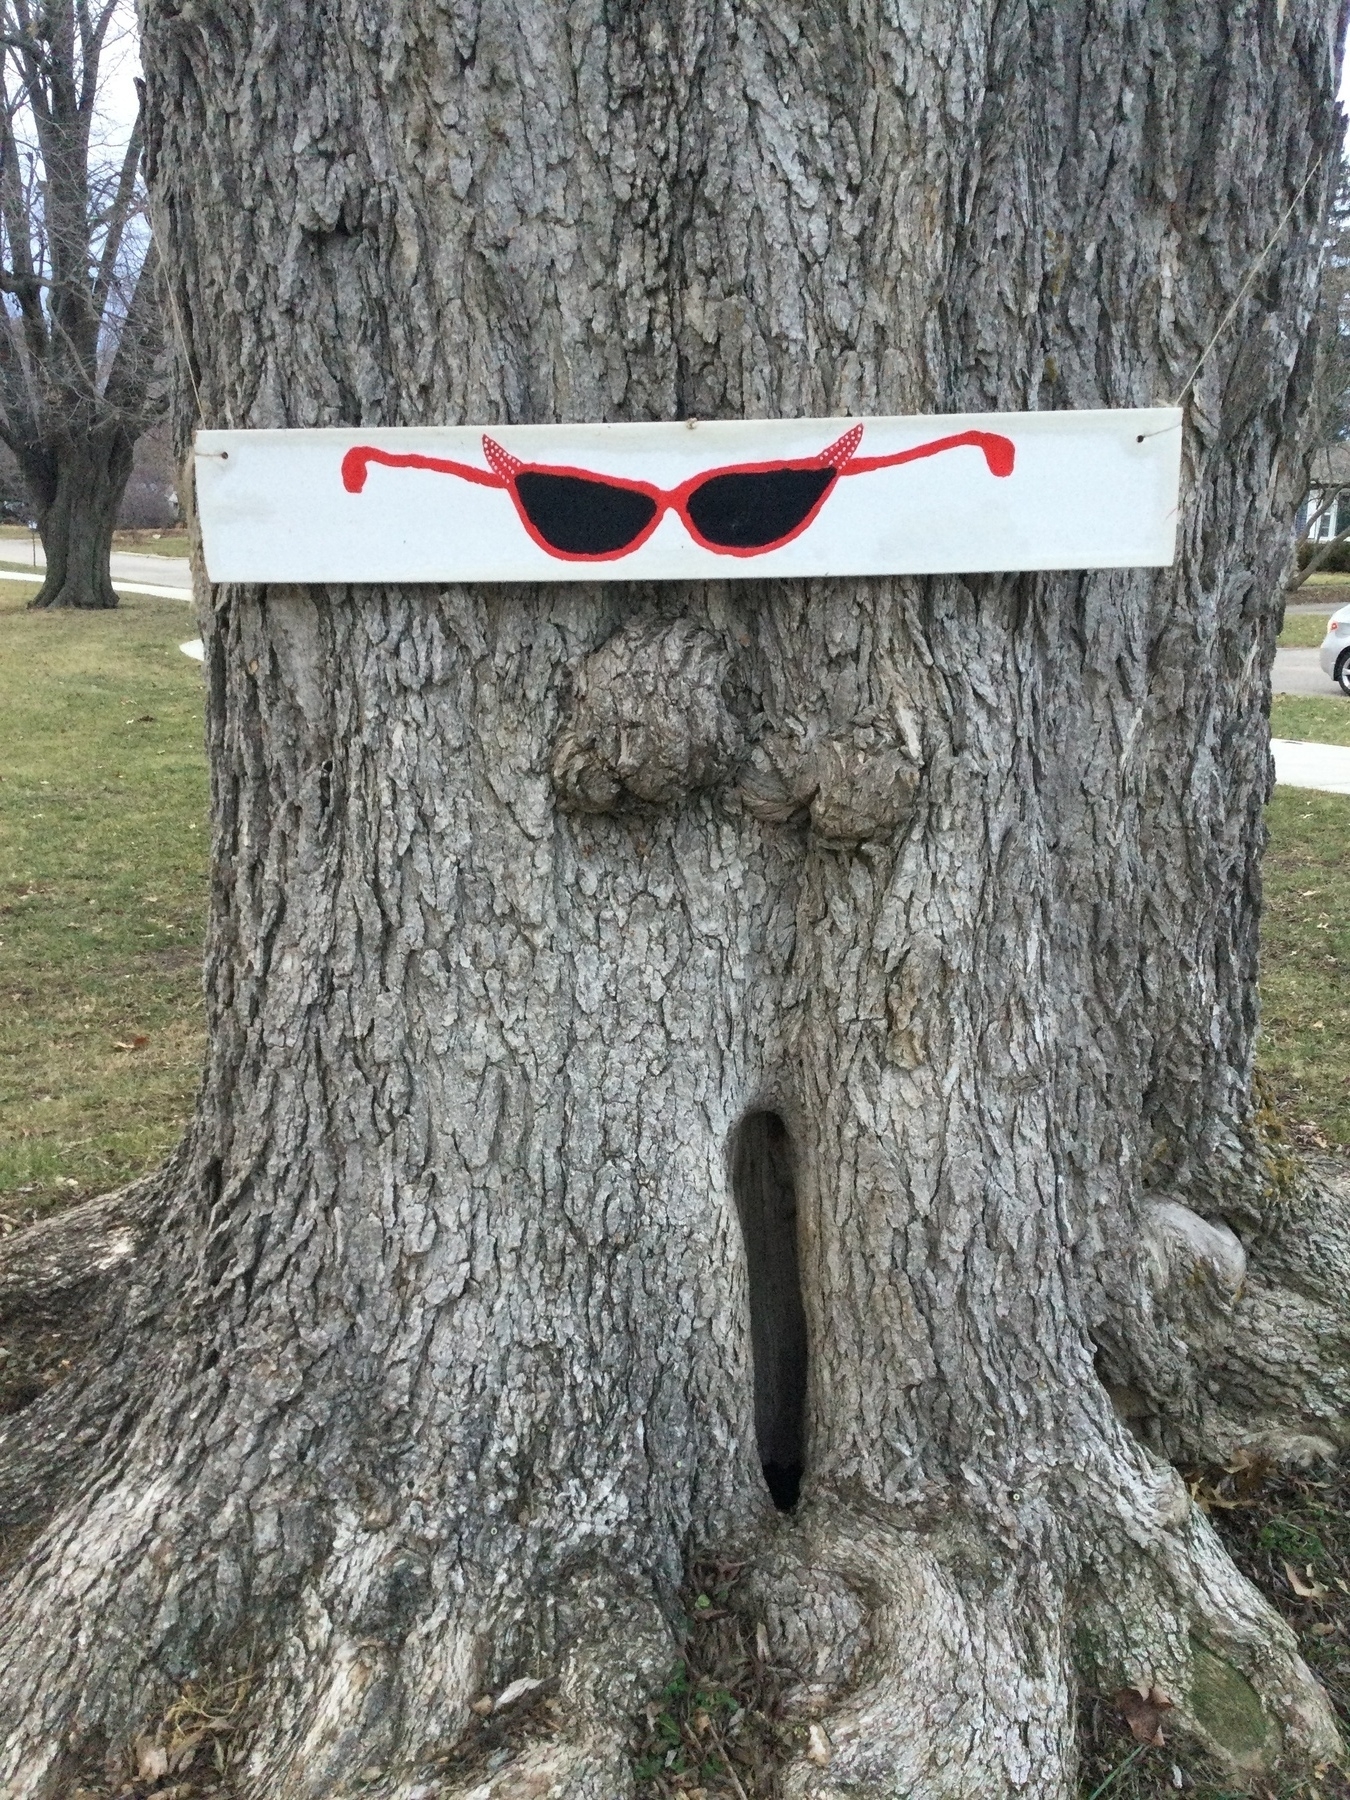 A broad tree trunk has a white, wide board attached to it. Drawn on the board are red sunglasses with pointy bits rising up from the outside of he lens, like cats’ ears or eyes. The ends of the bows suggest ovaries at the end of fallopian tubes. There are no words. Below the board, the tree has two bulbous knobs, and near the roots, a dark vertical opening. 